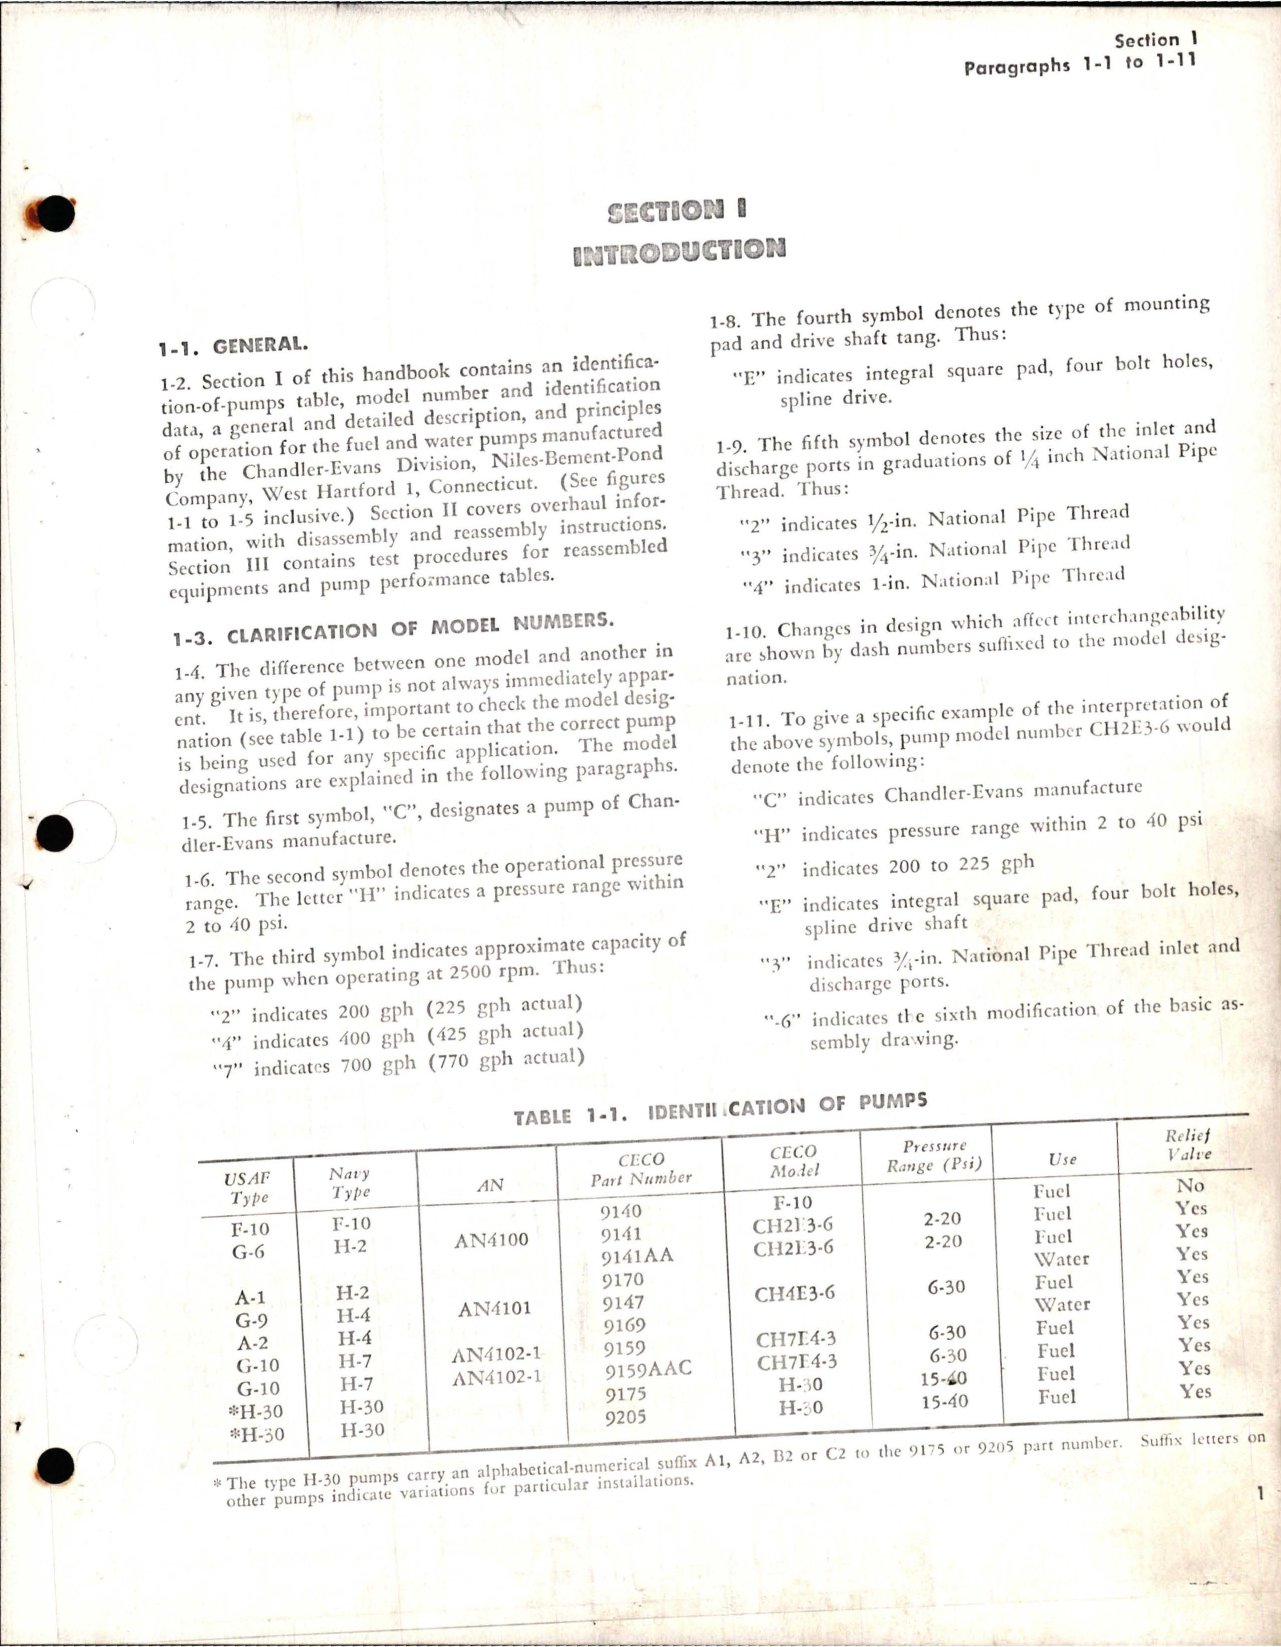 Sample page 5 from AirCorps Library document: Overhaul Instructions with Parts Catalog for Fuel and Water Pumps